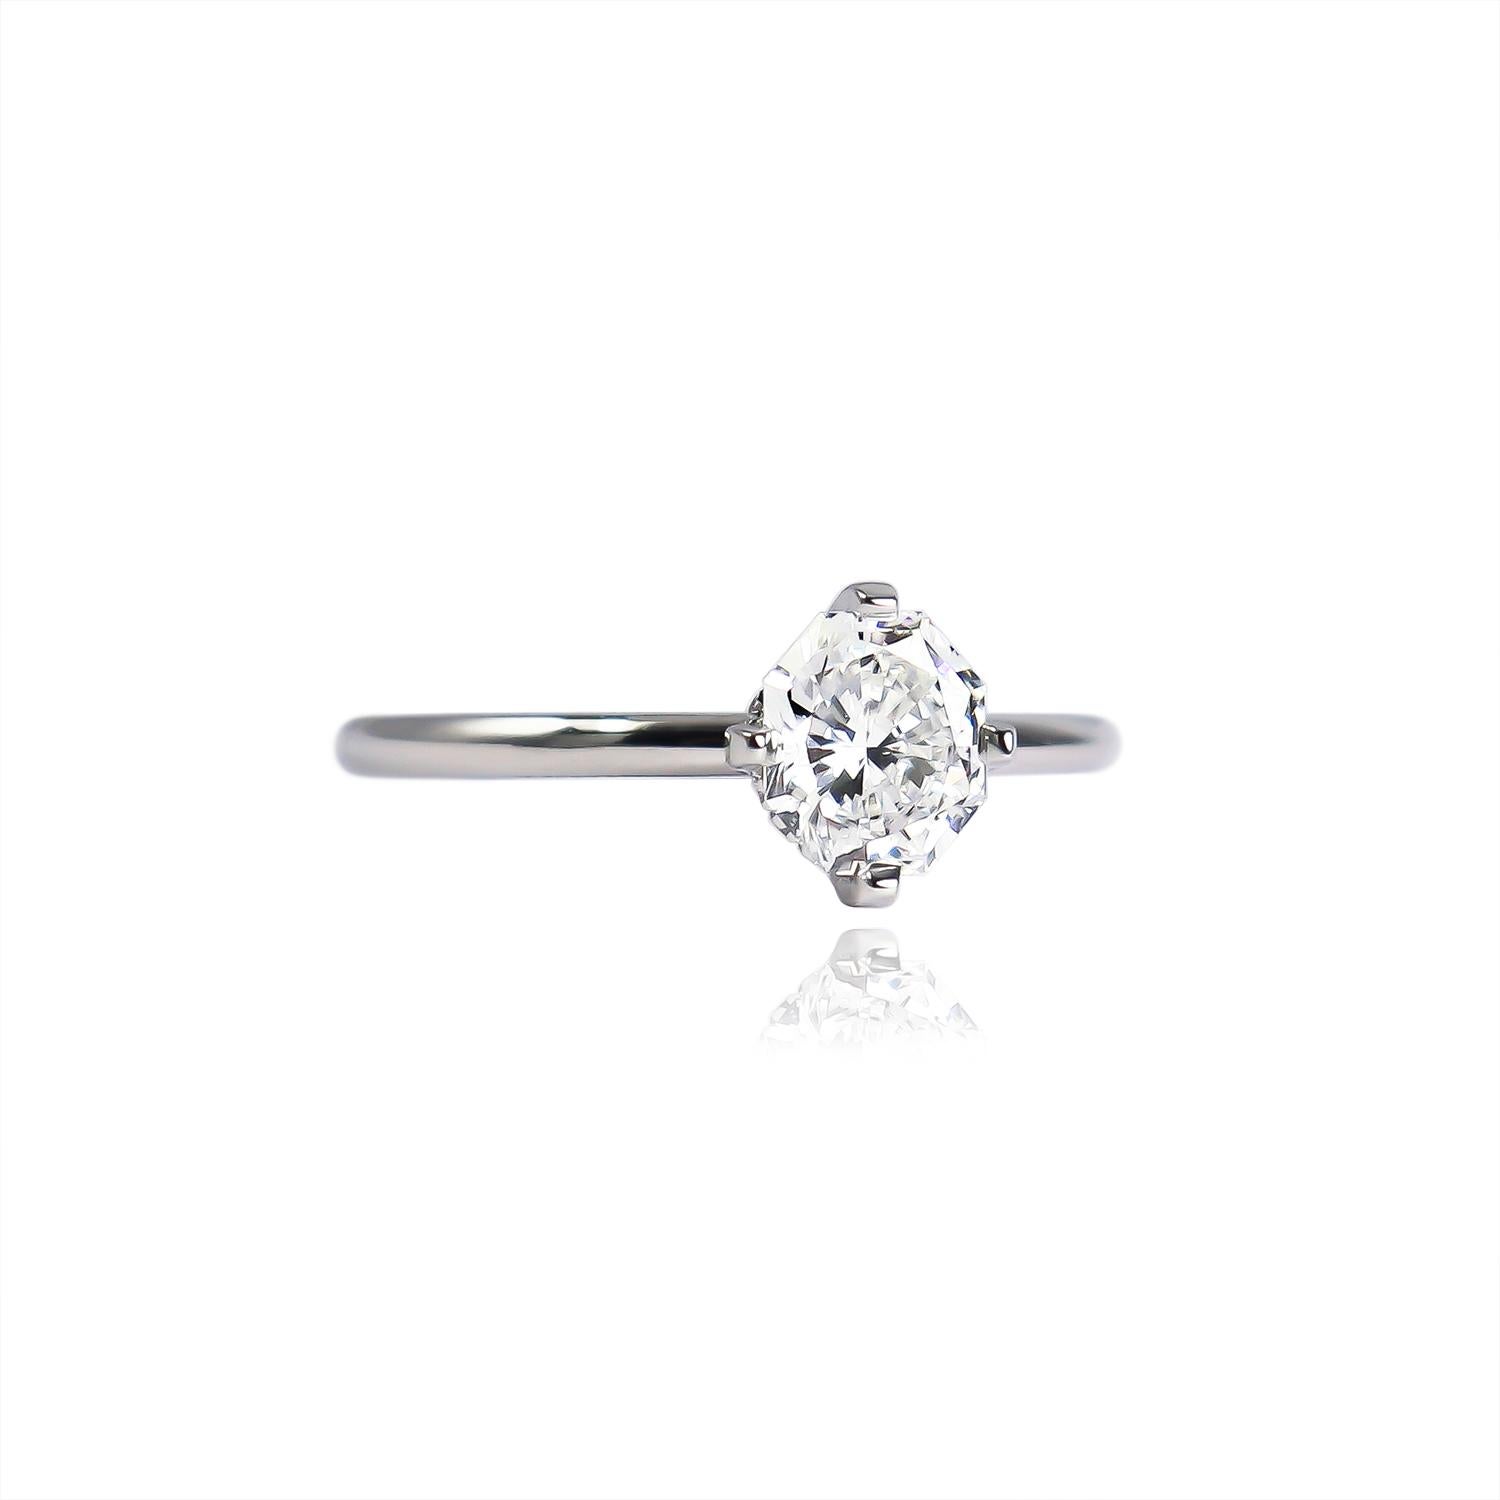 Contemporary J. Birnbach GIA Certified 1.03 Carat F VS1 Radiant Cut Diamond Solitaire Ring